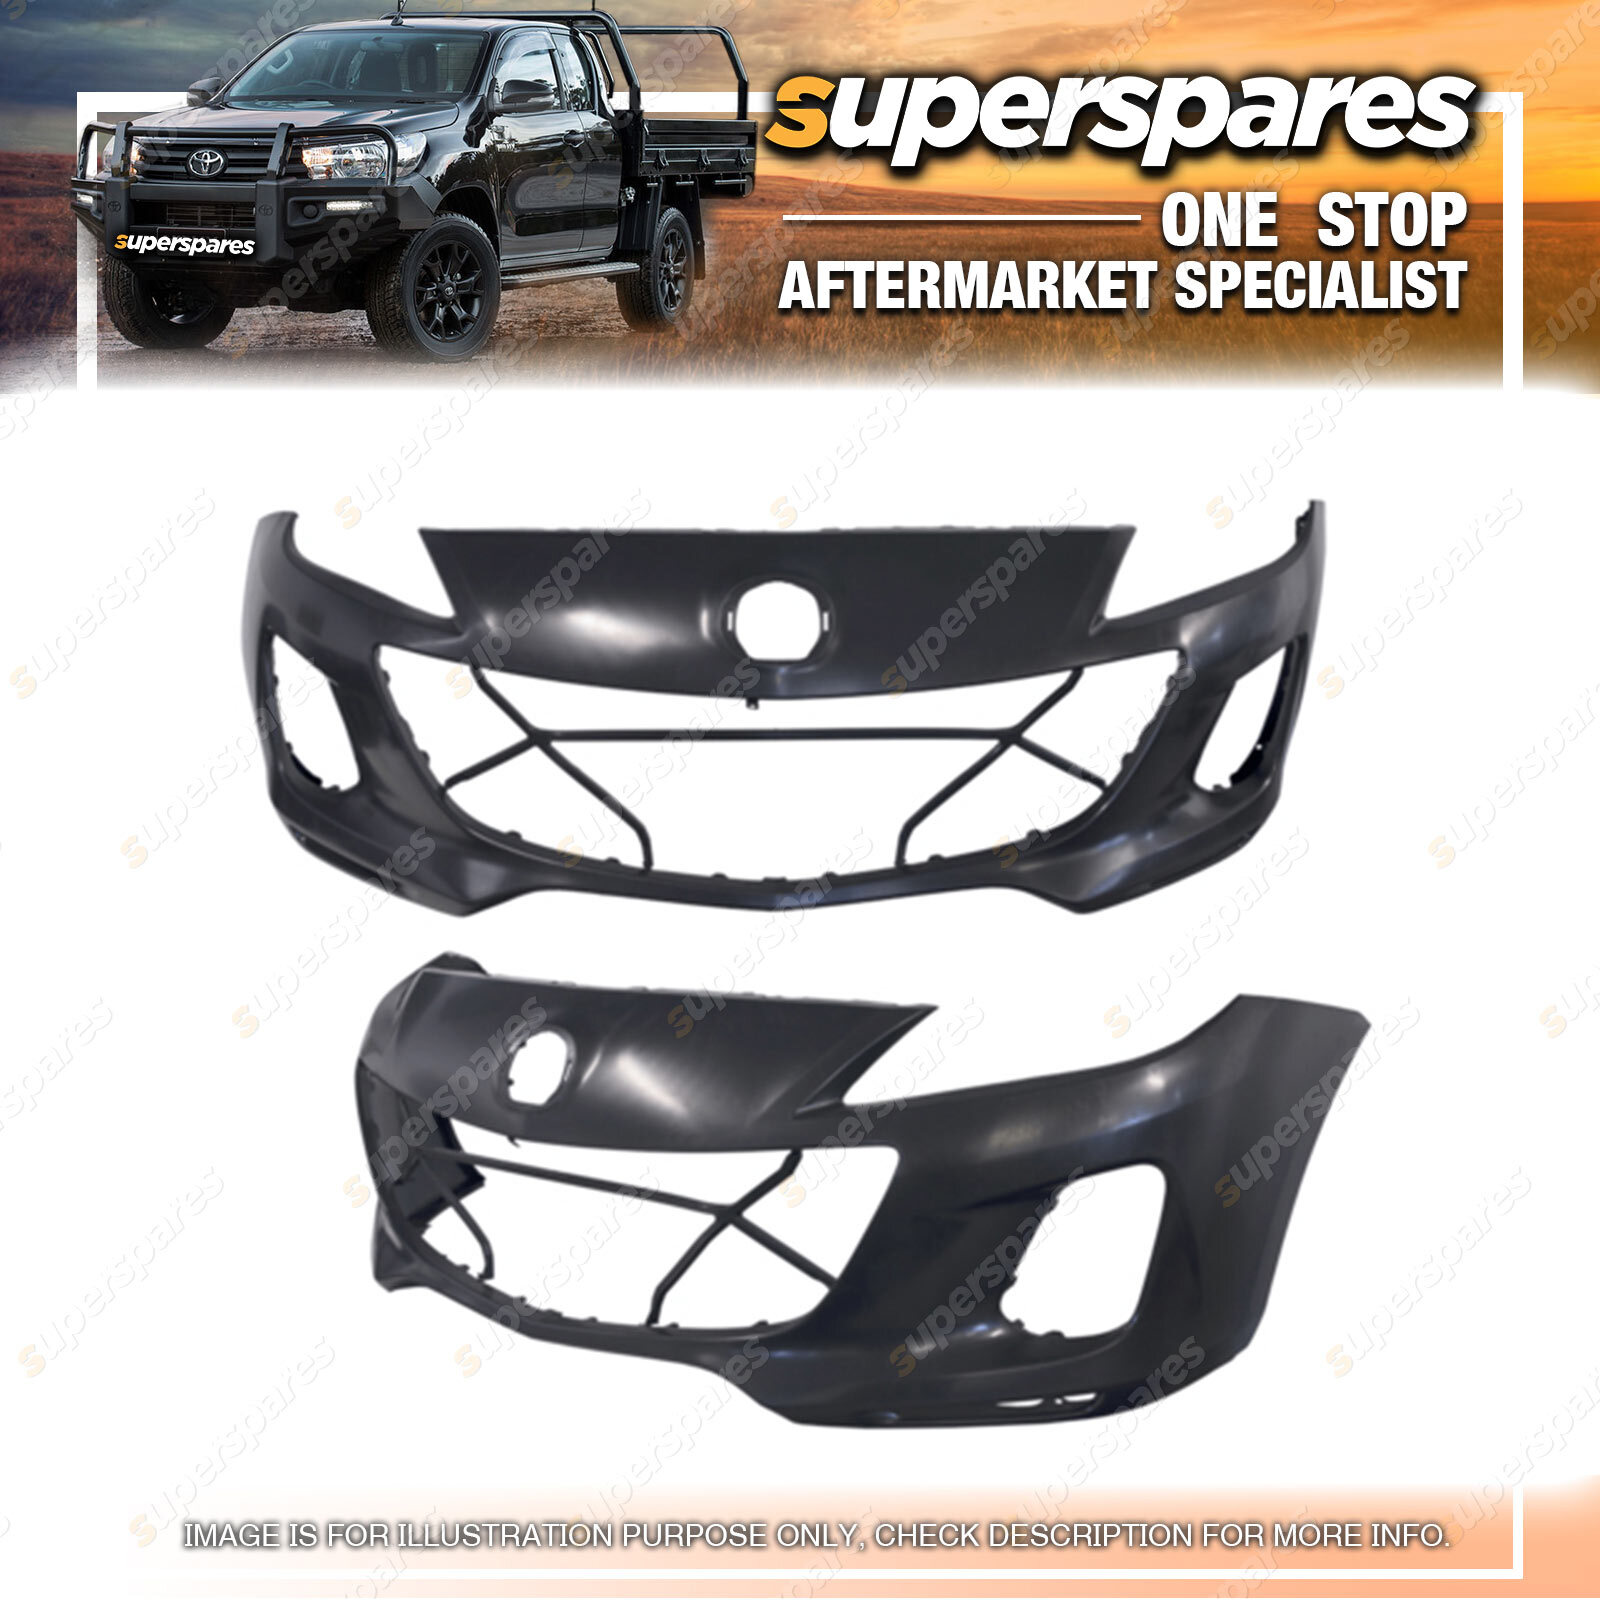 Front Bumper Bar Cover for Mazda 3 Sp25 BL SERIES 2 09